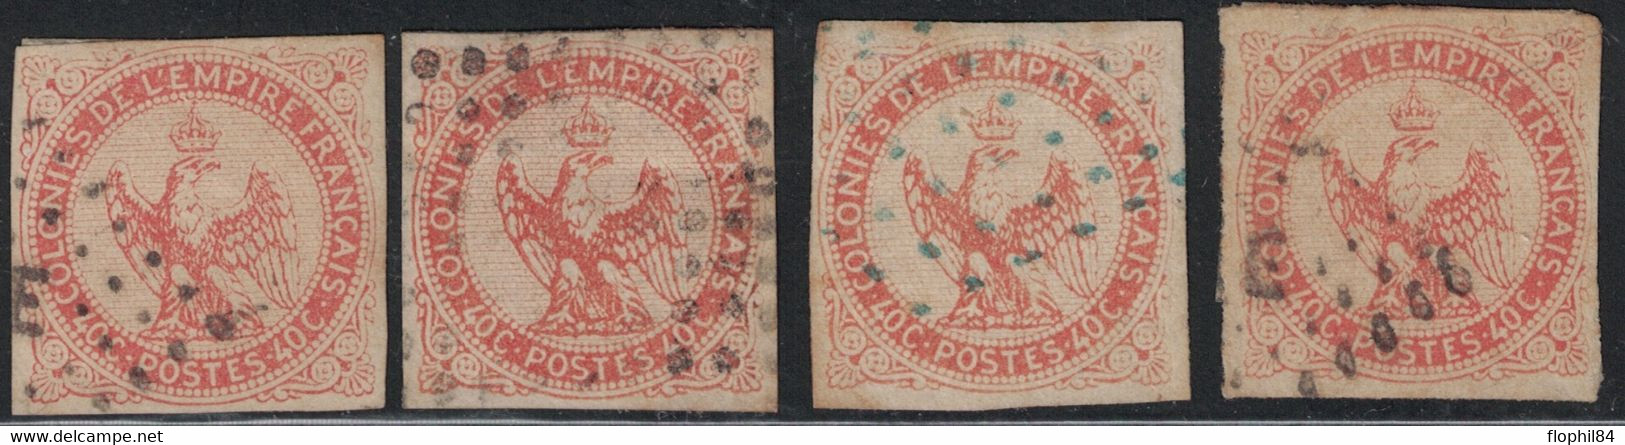 COLONIES GENERALES - AIGLE IMPERIAL - N°5 - ENSEMBLE DE 4 TIMBRES. - Eagle And Crown